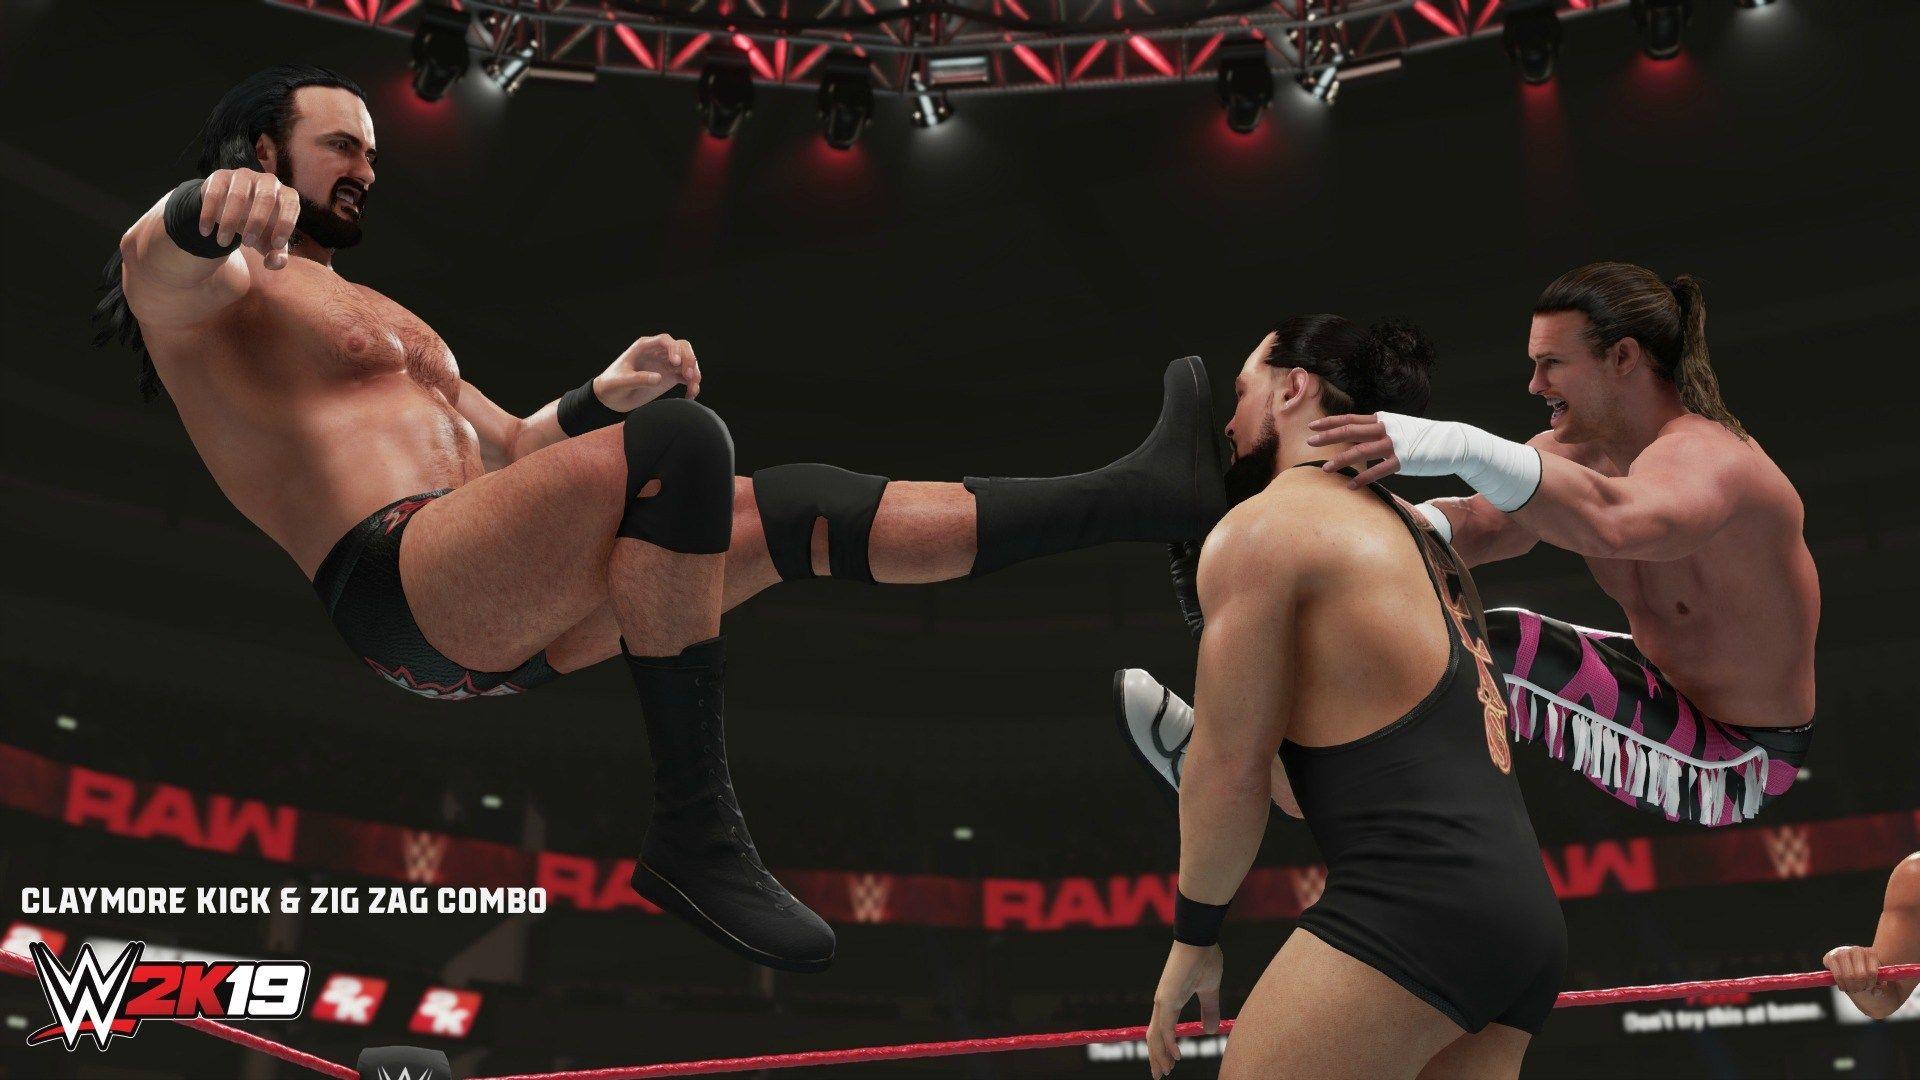 Add to your arsenal with the WWE 2K19 New Moves Pack on Xbox One